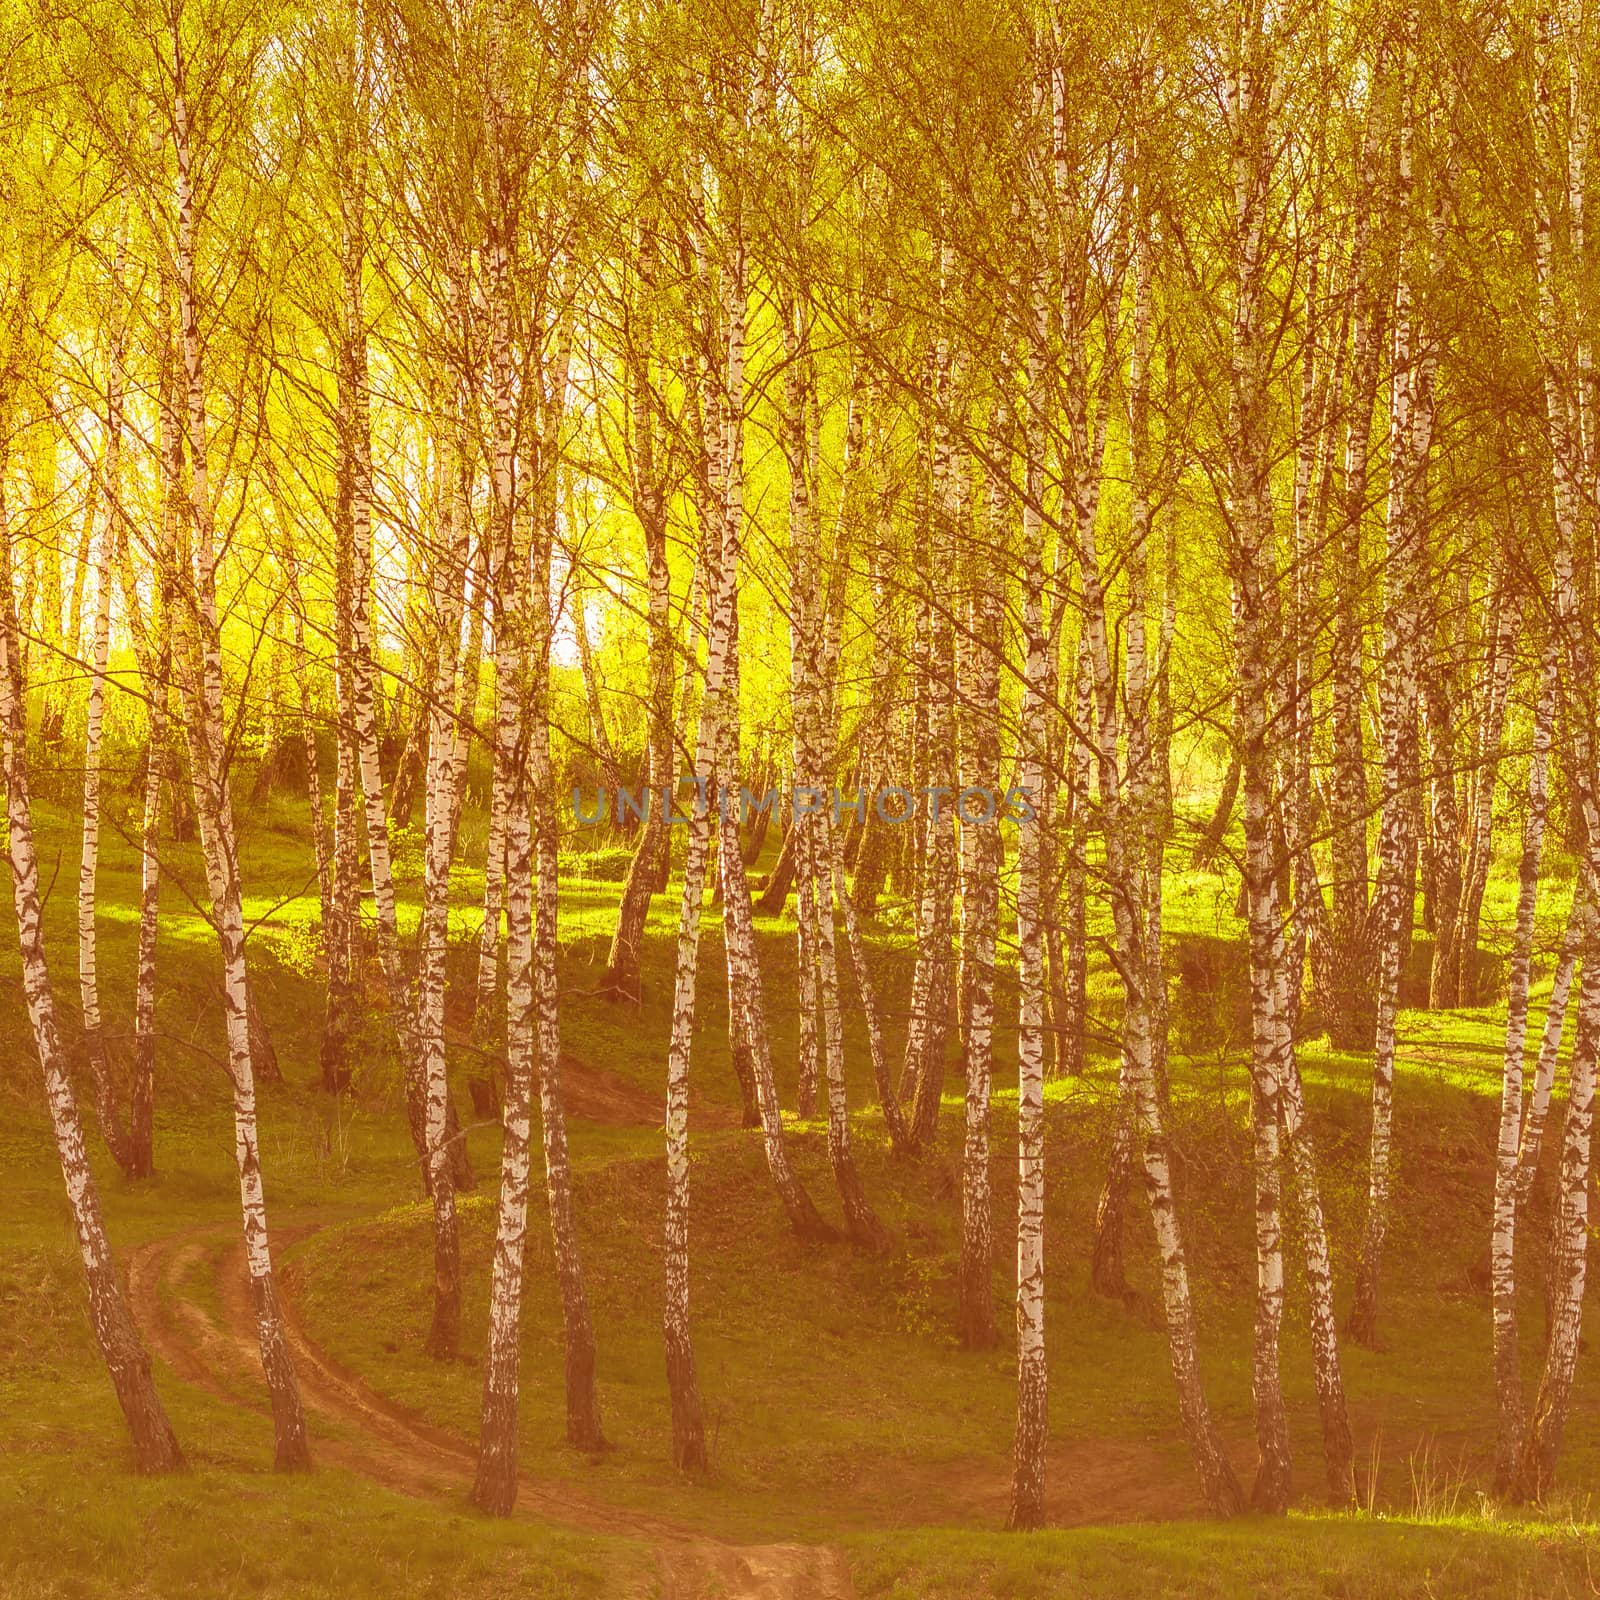 Sunset or dawn in a spring birch forest with bright young foliage glowing in the rays of the sun and shadows from trees.